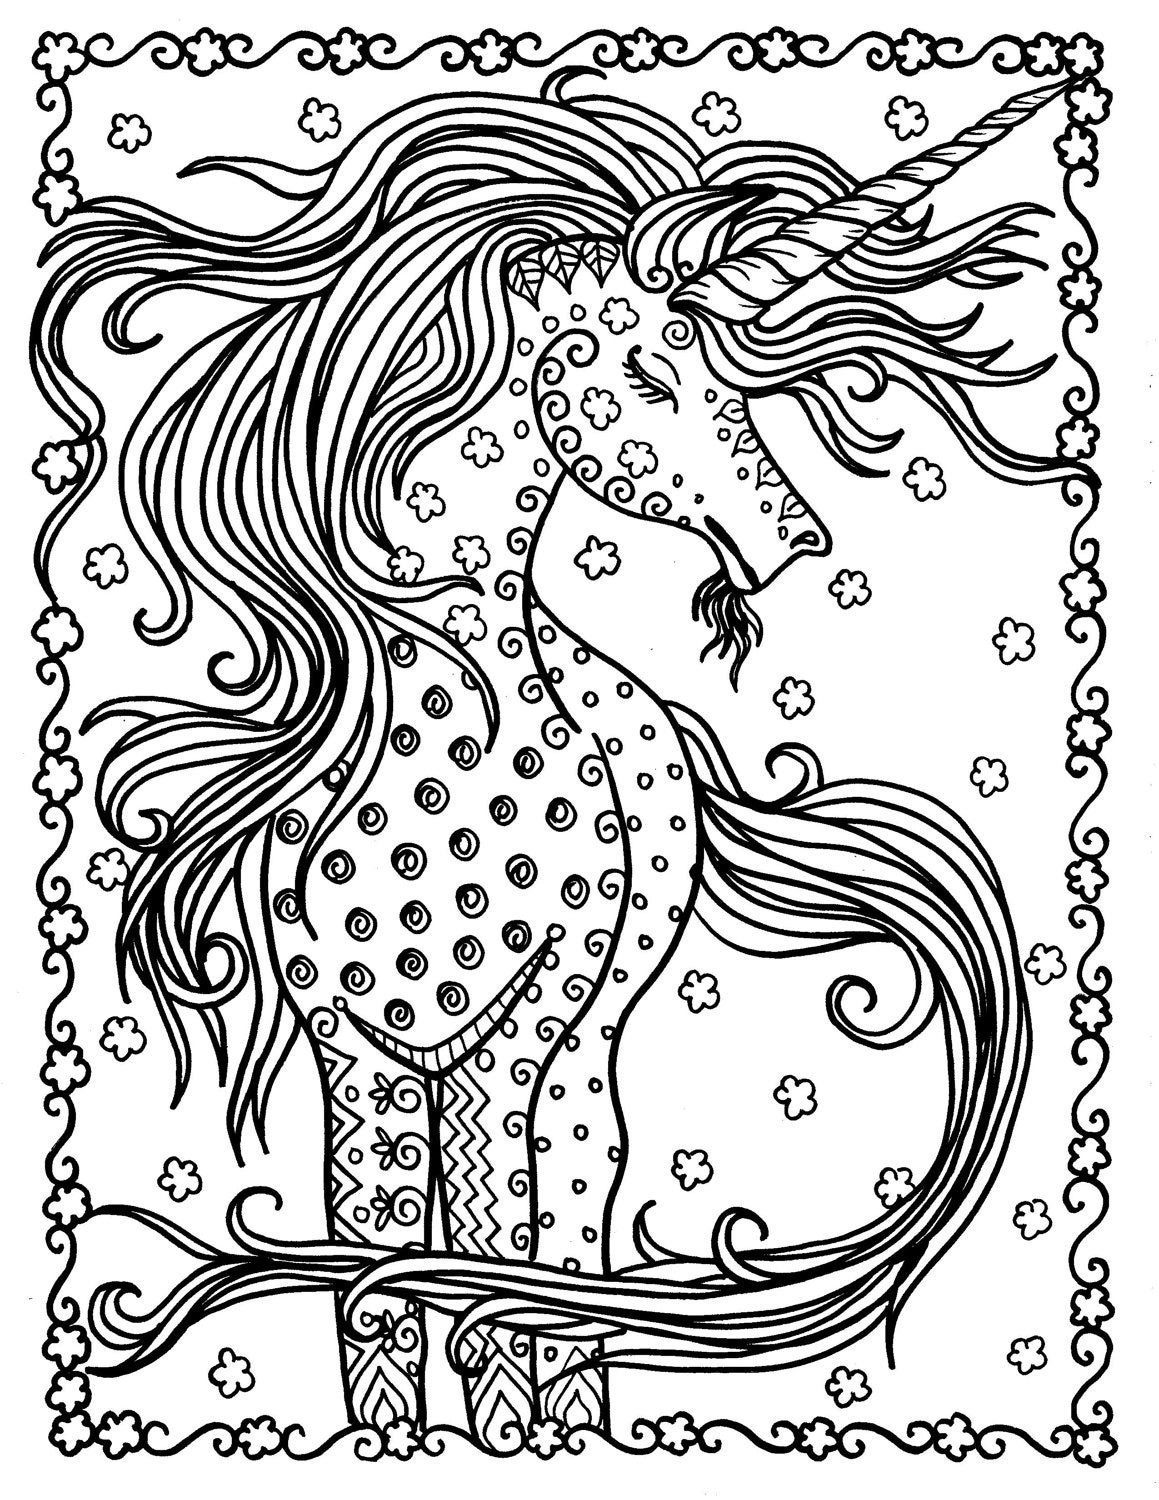 Unicorn Coloring Pages For Adults
 Unicorn Instant Download Fantasy Coloring Pages Adult